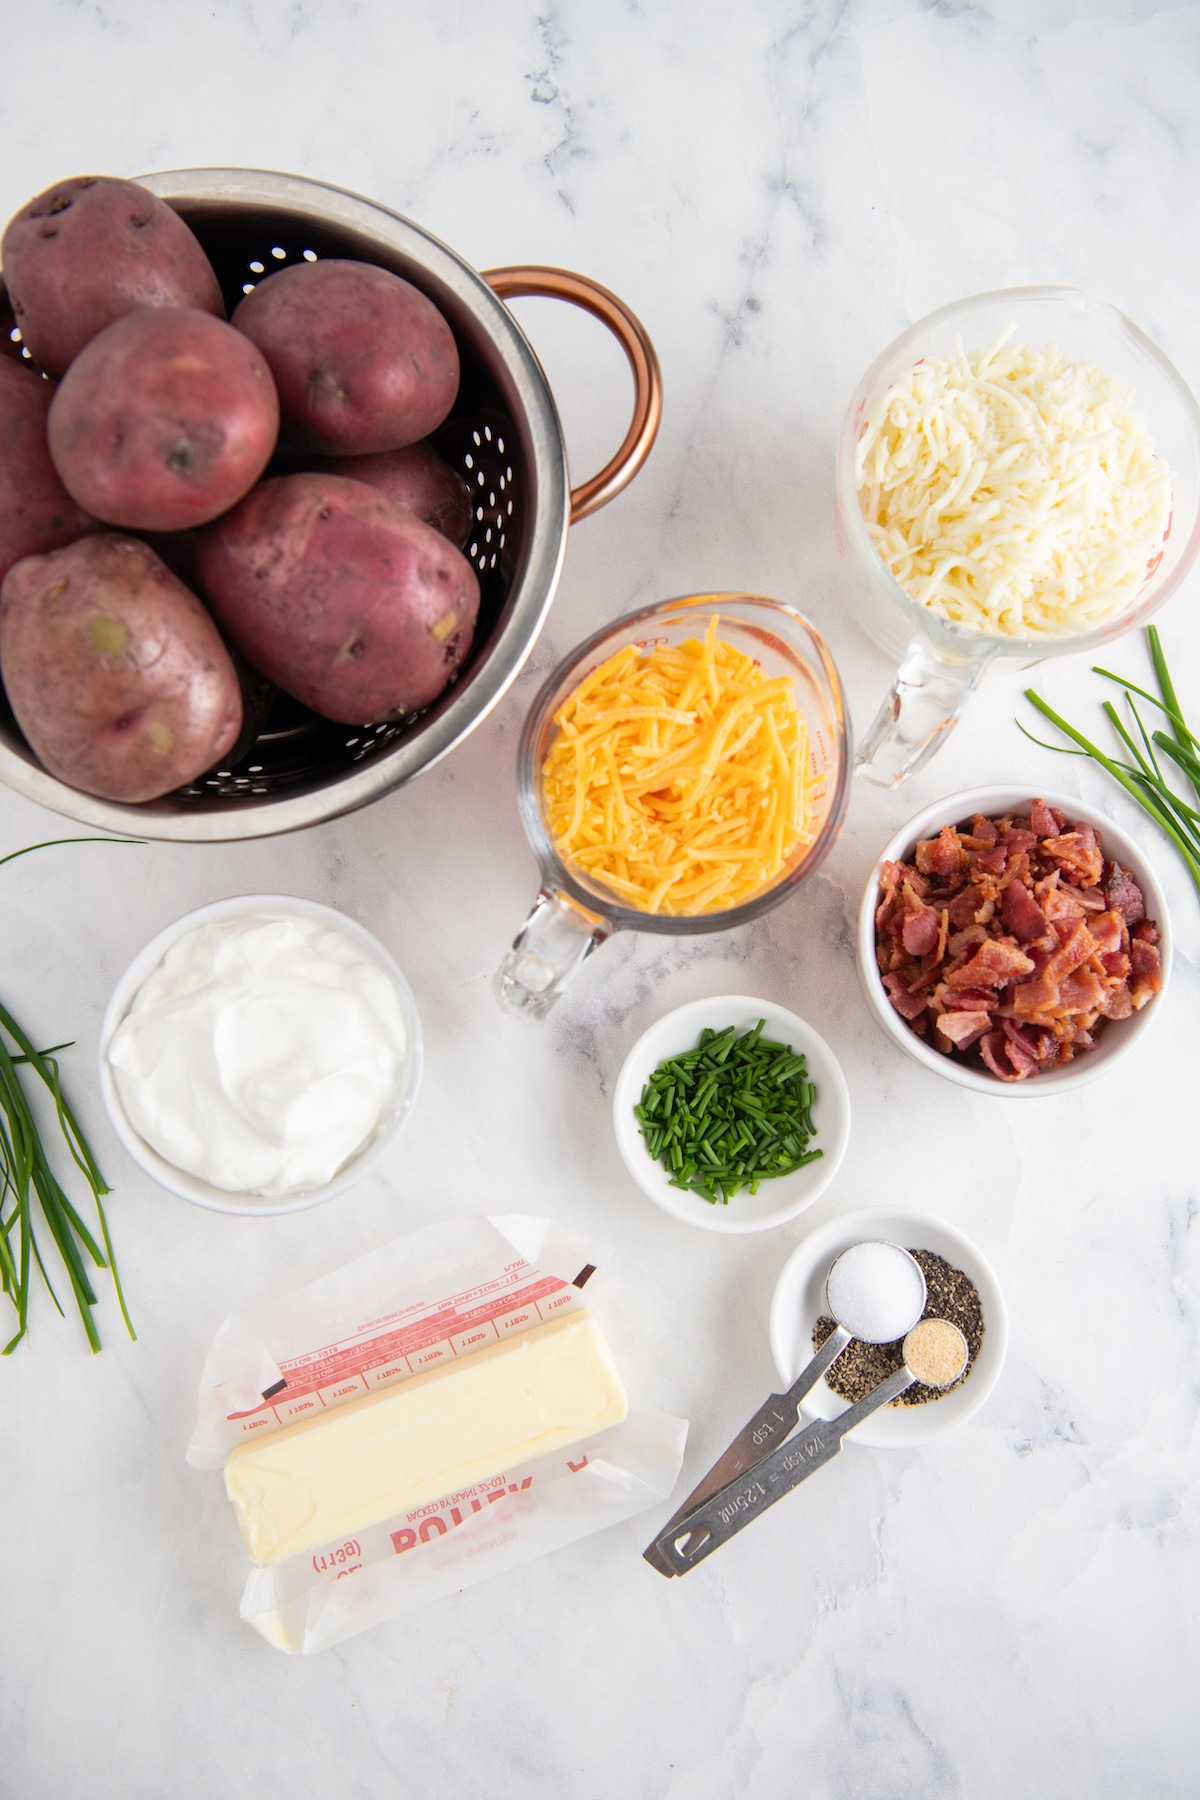 Ingredients for twice baked potato casserole in bowls on a marble background.